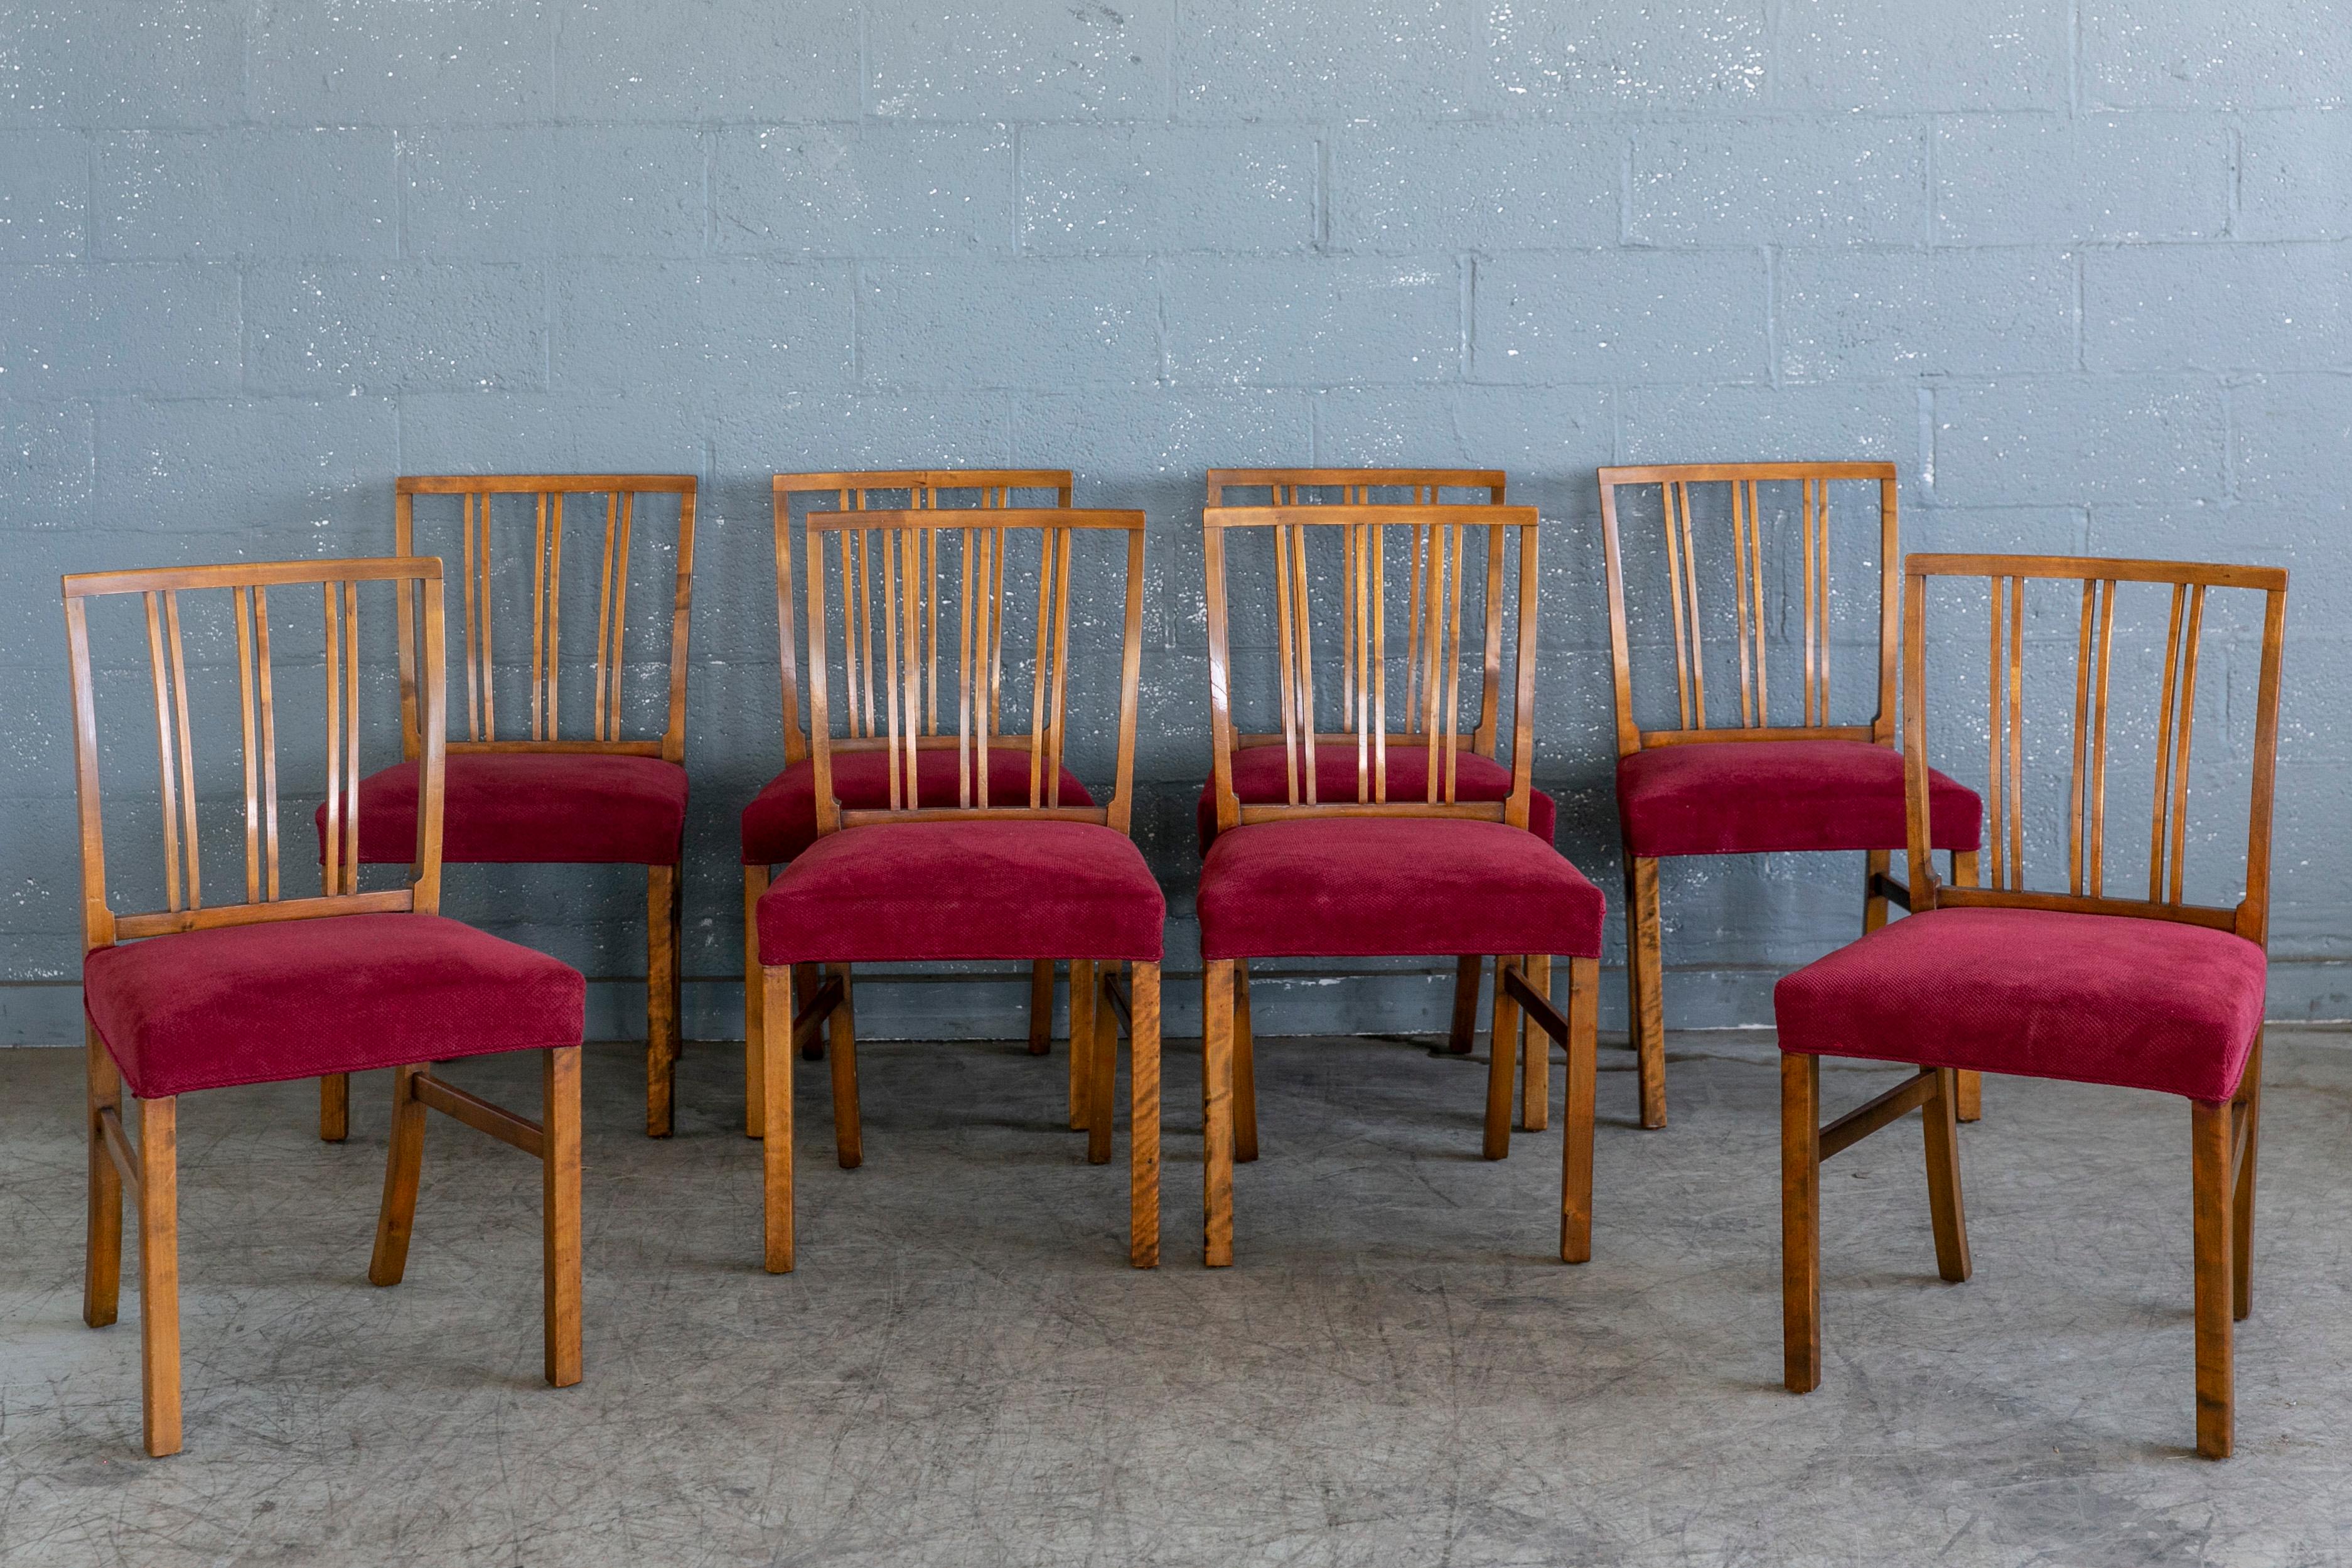 Superb and rare set of dining chairs produced by Master Furniture Maker, TH. Schmidt in Copenhagen Denmark in 1946 (we have a copy of the original receipt). The chairs are show similar design cues as some of Wegner's early designs for Mikael Laursen